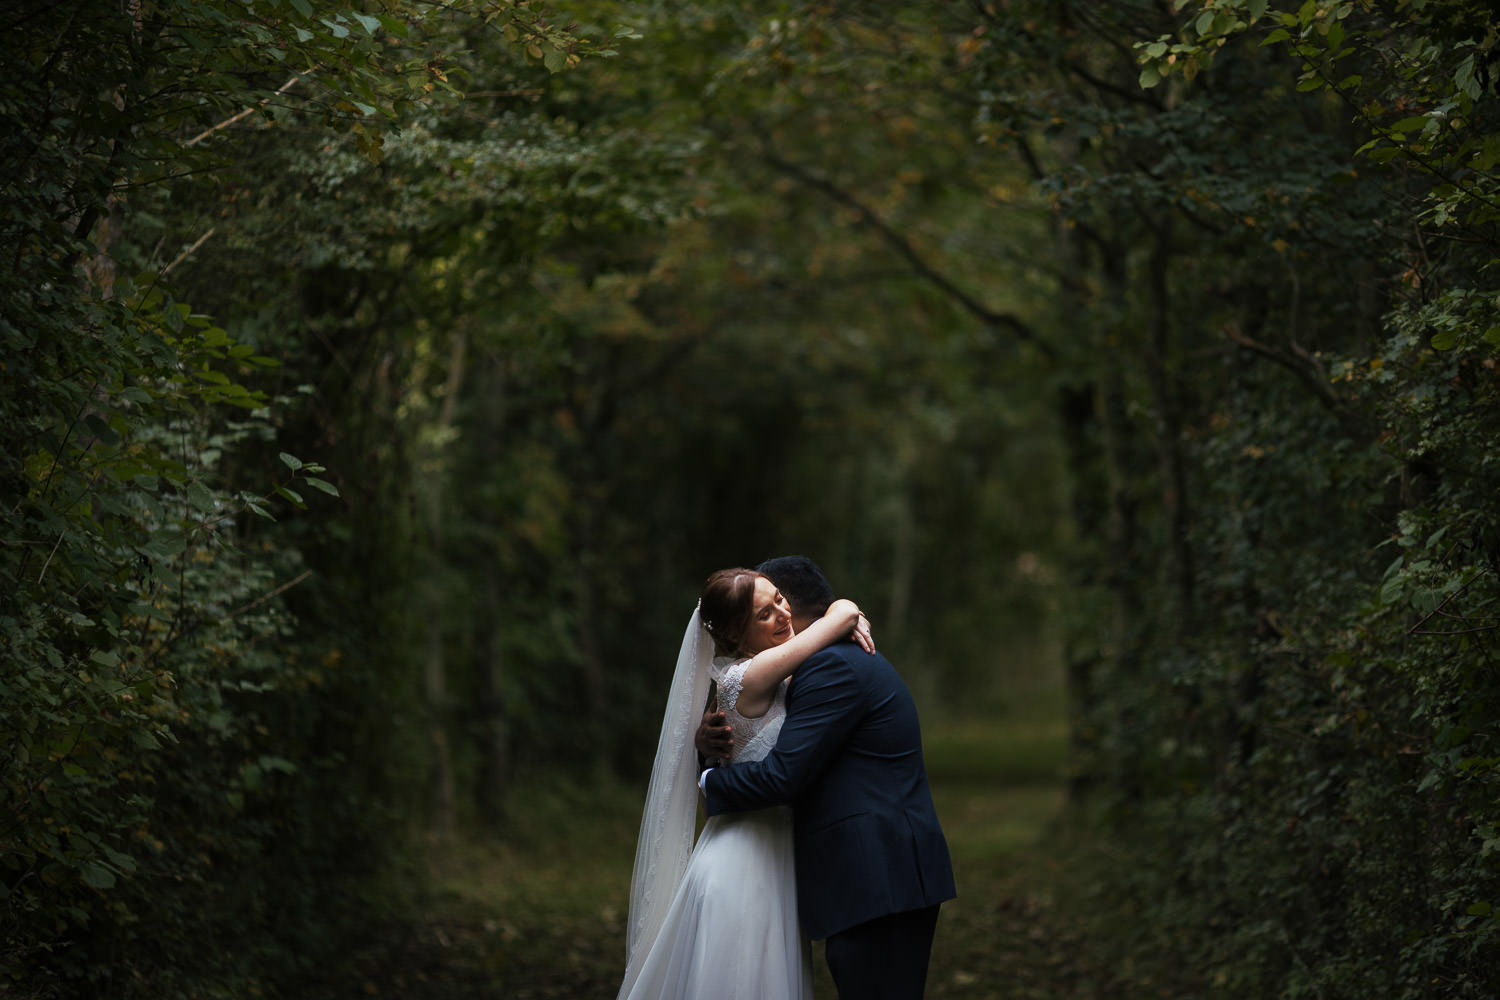 Bride and groom hugging in the grassy lane at Alpheton Hall Barns.